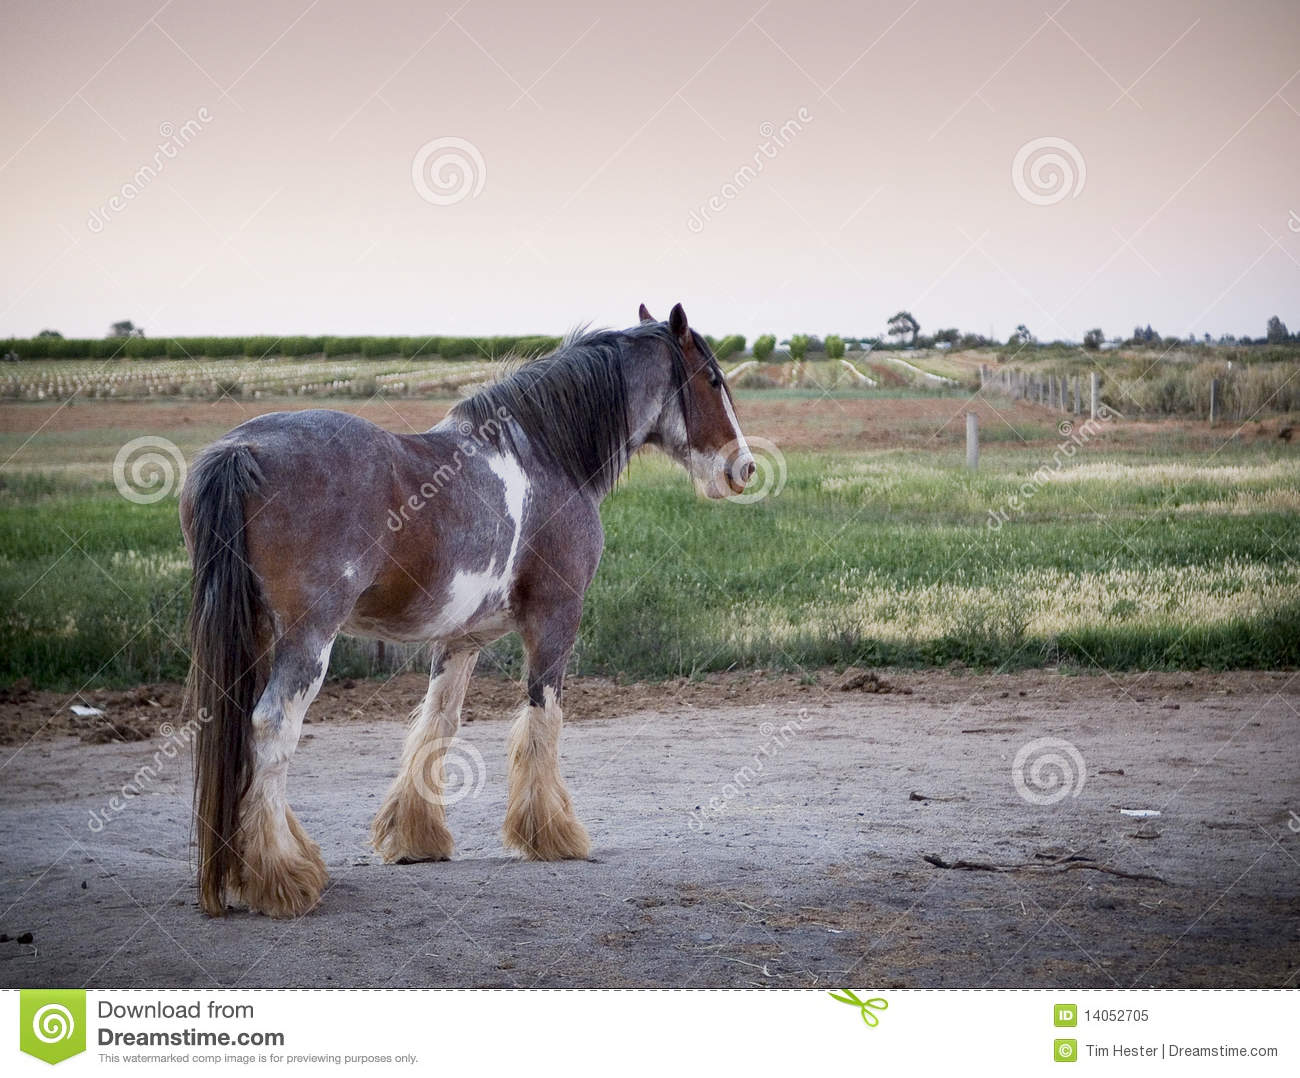 Clydesdale Horse Royalty Free Stock Photo   Image  14052705